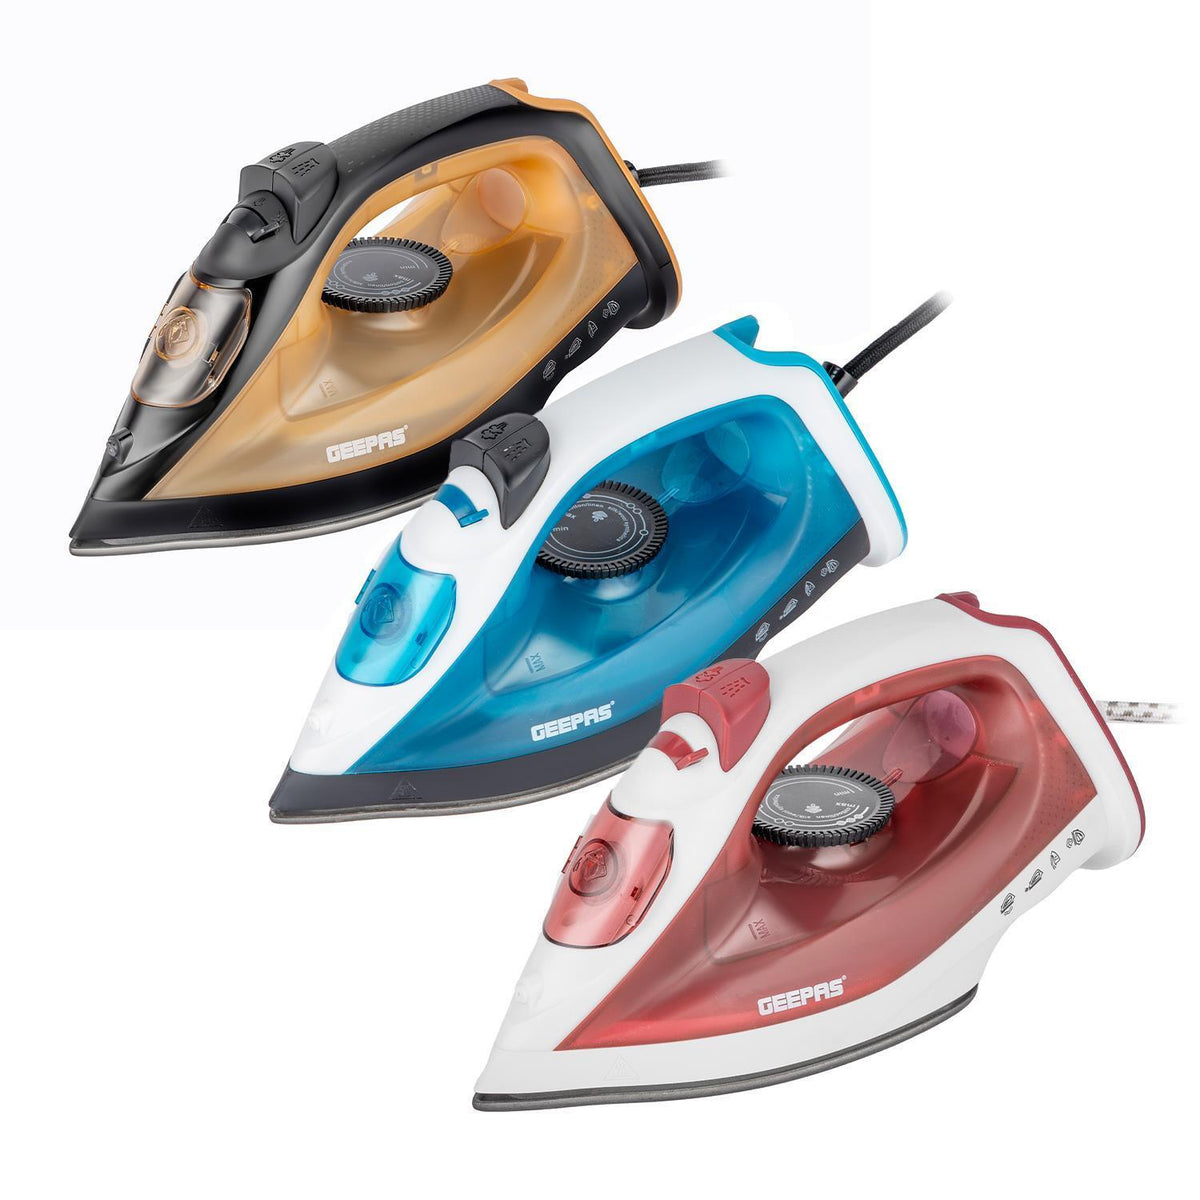 1800W Steam Iron With Non-Stick Soleplate (3-Variants)